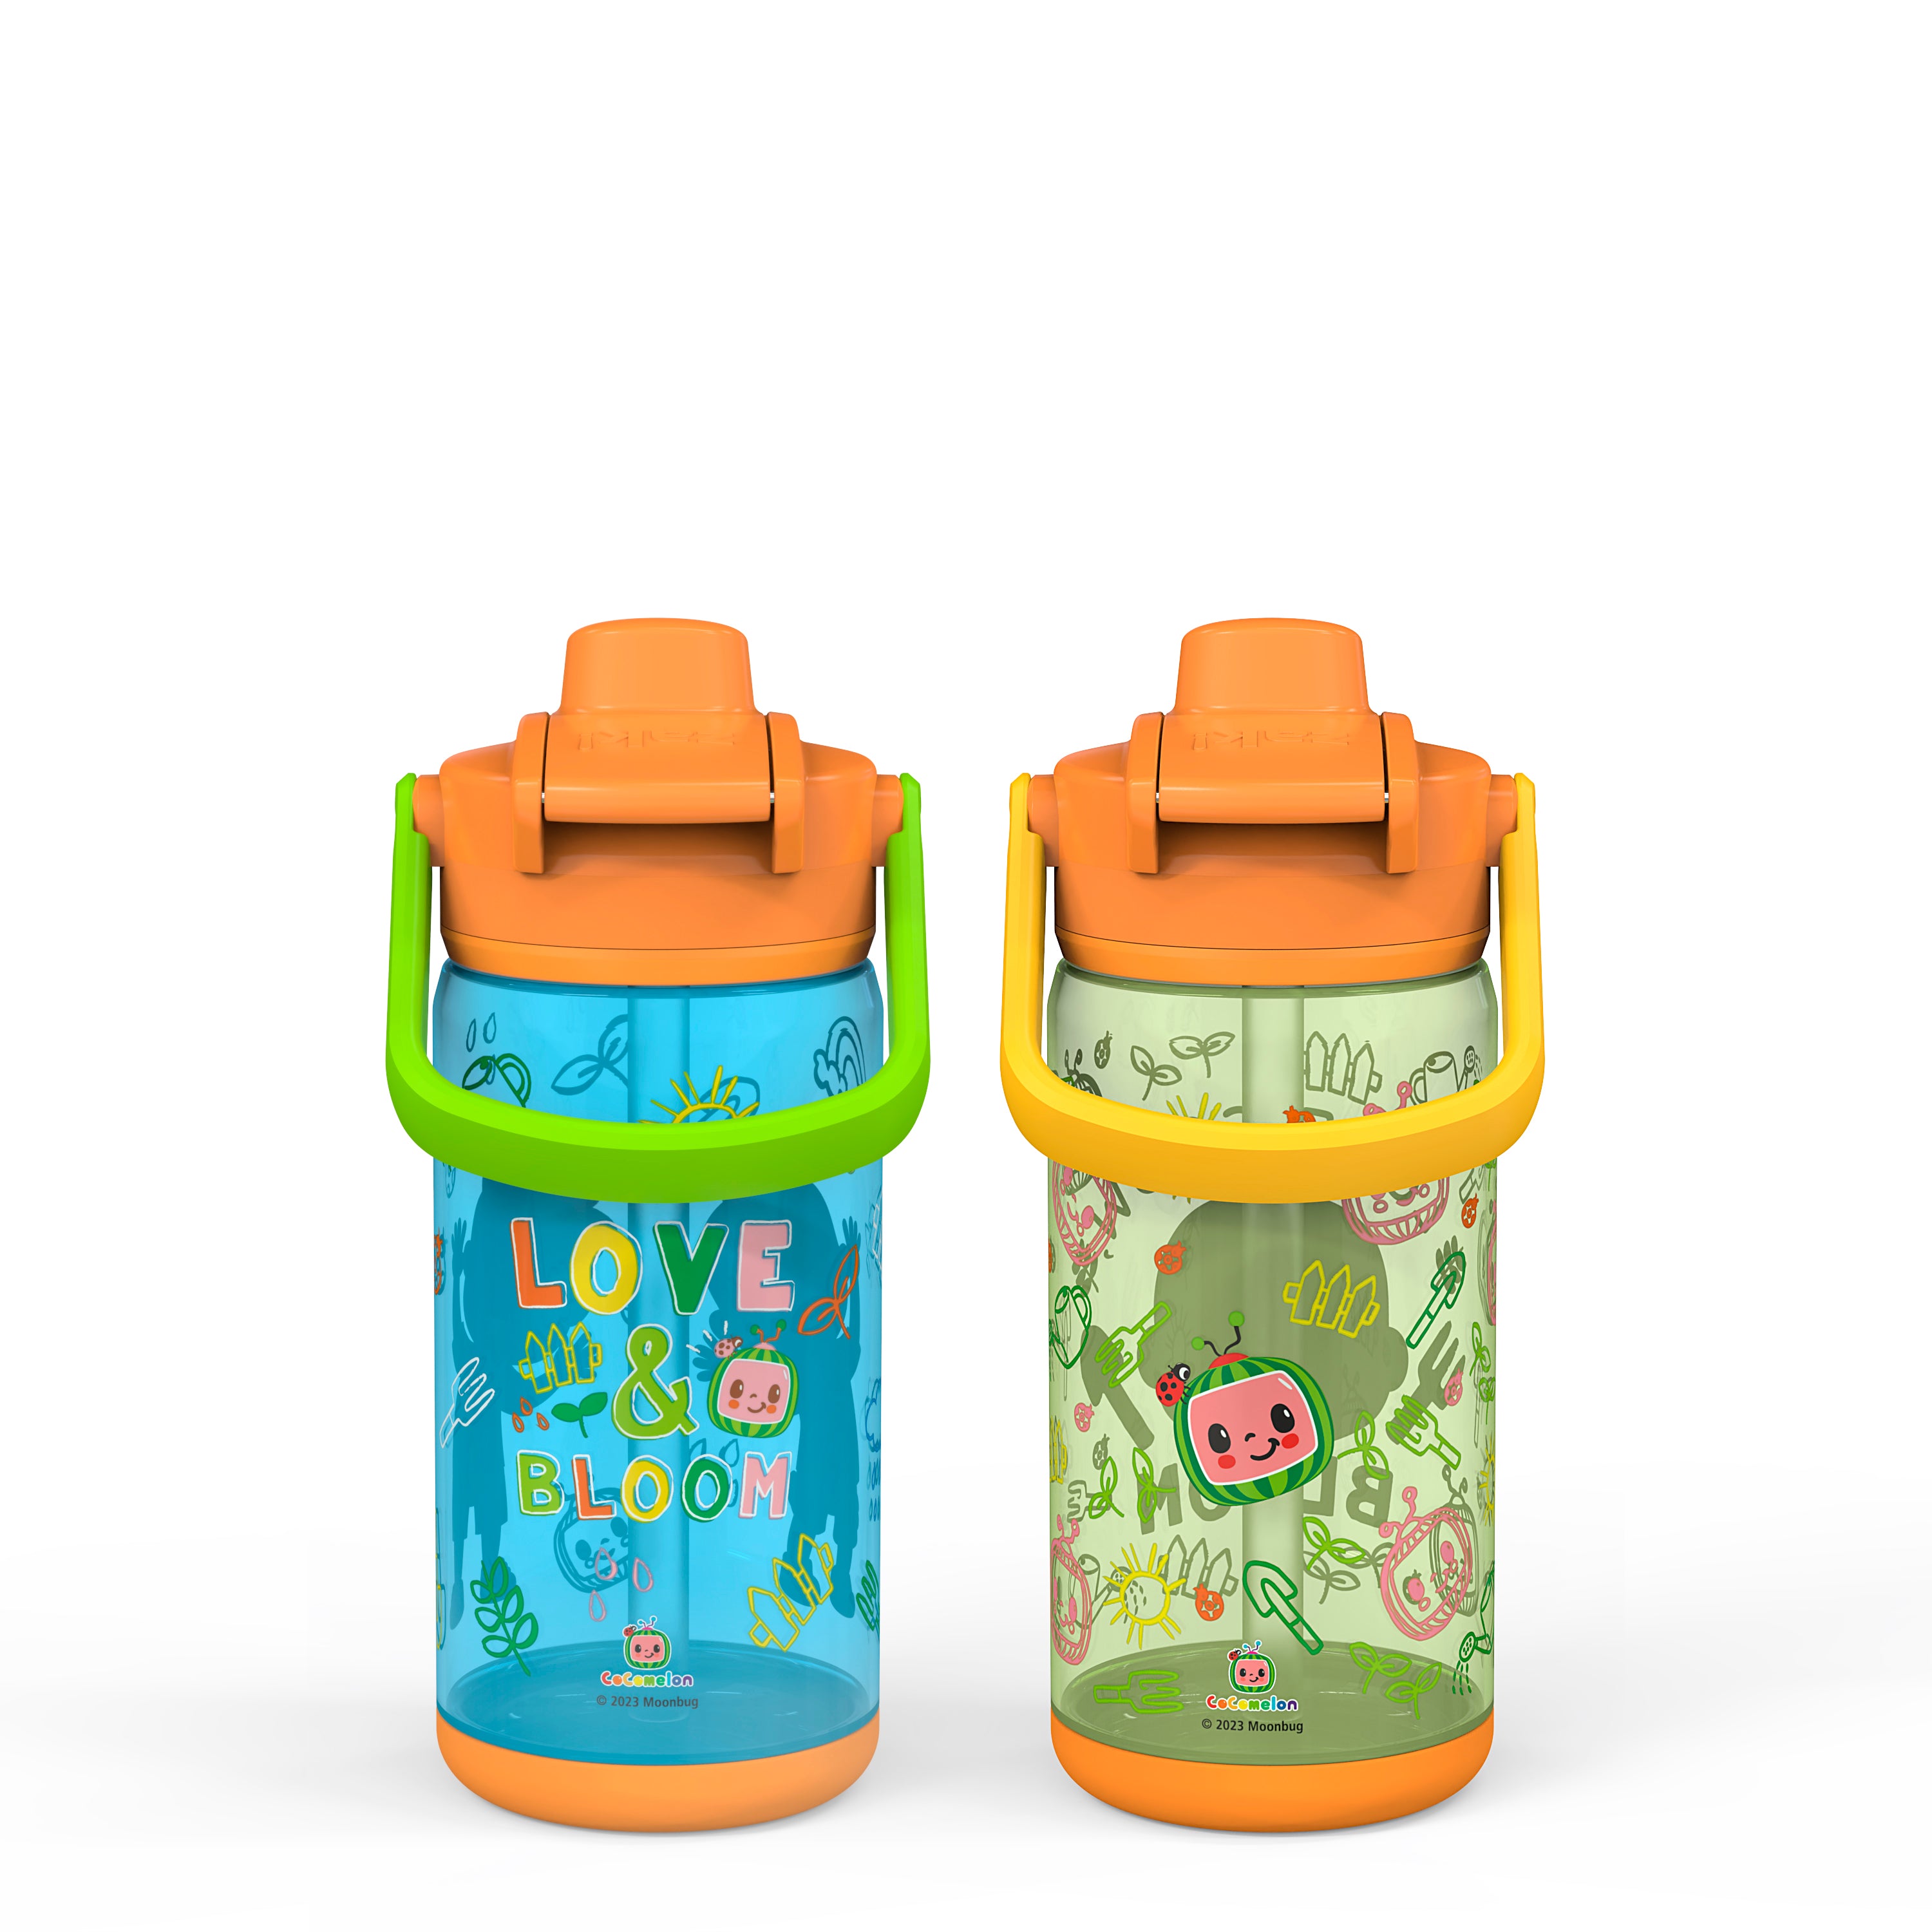 Disney Princess Beacon 2-Piece Kids Water Bottle Set with Covered